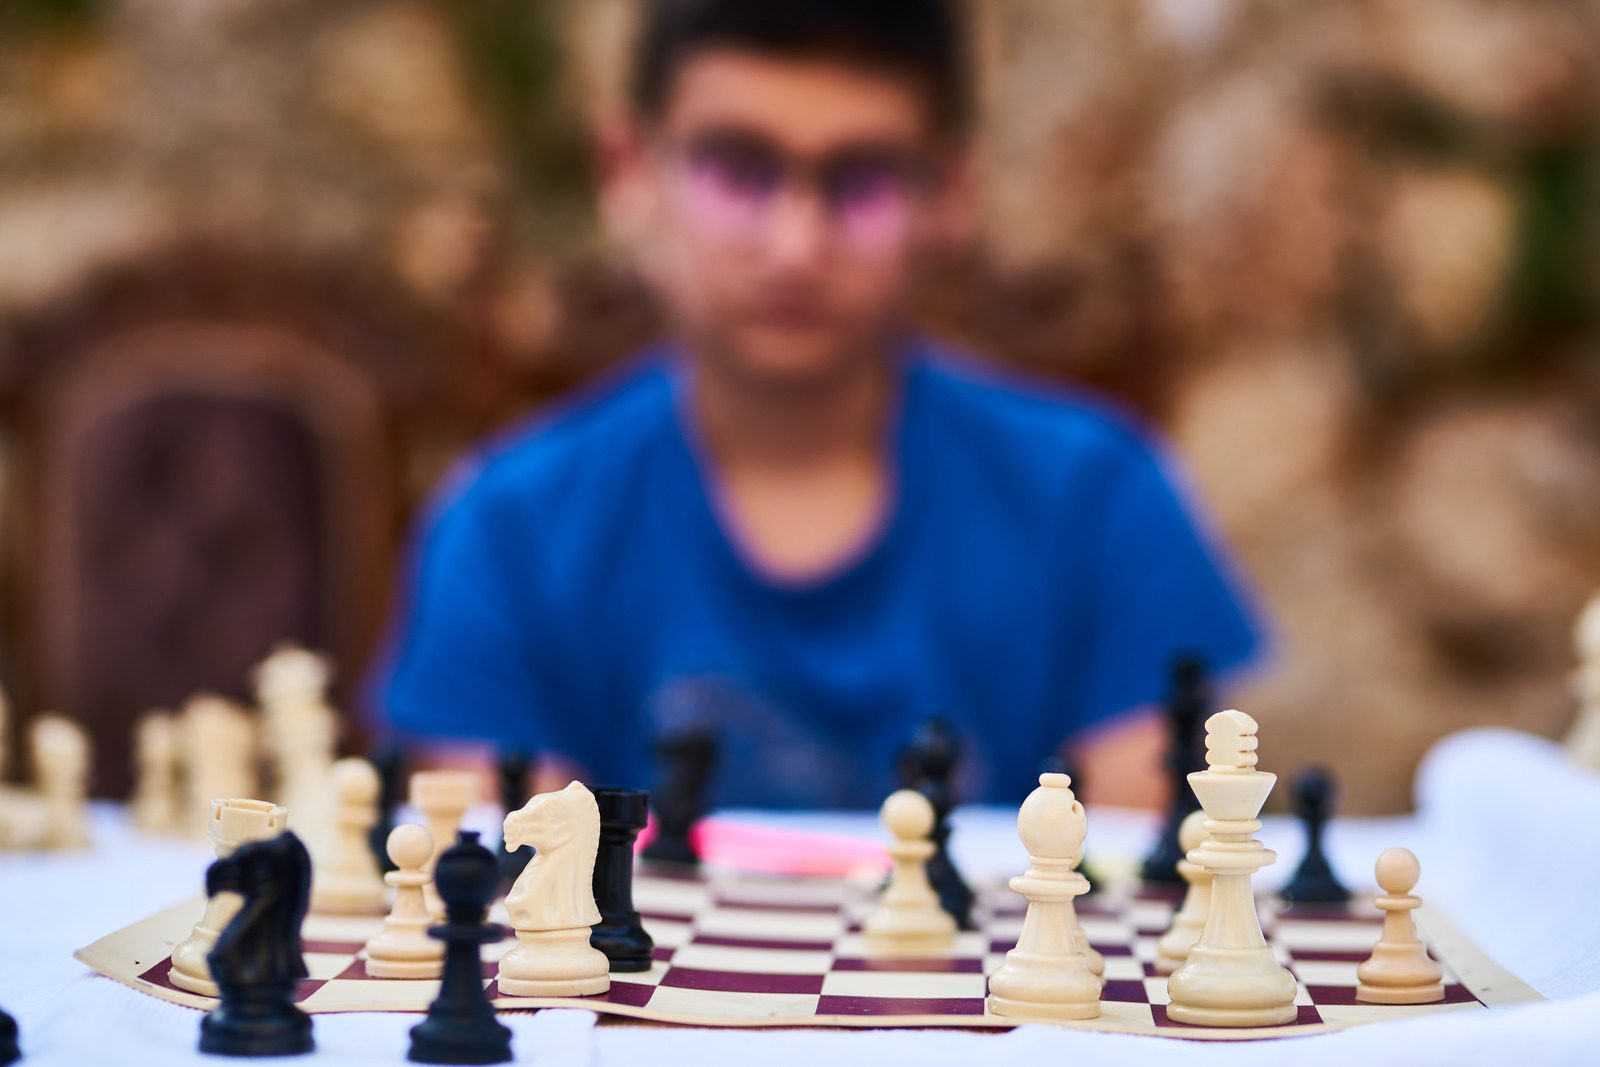 Meet Omar, our chess prodigy!